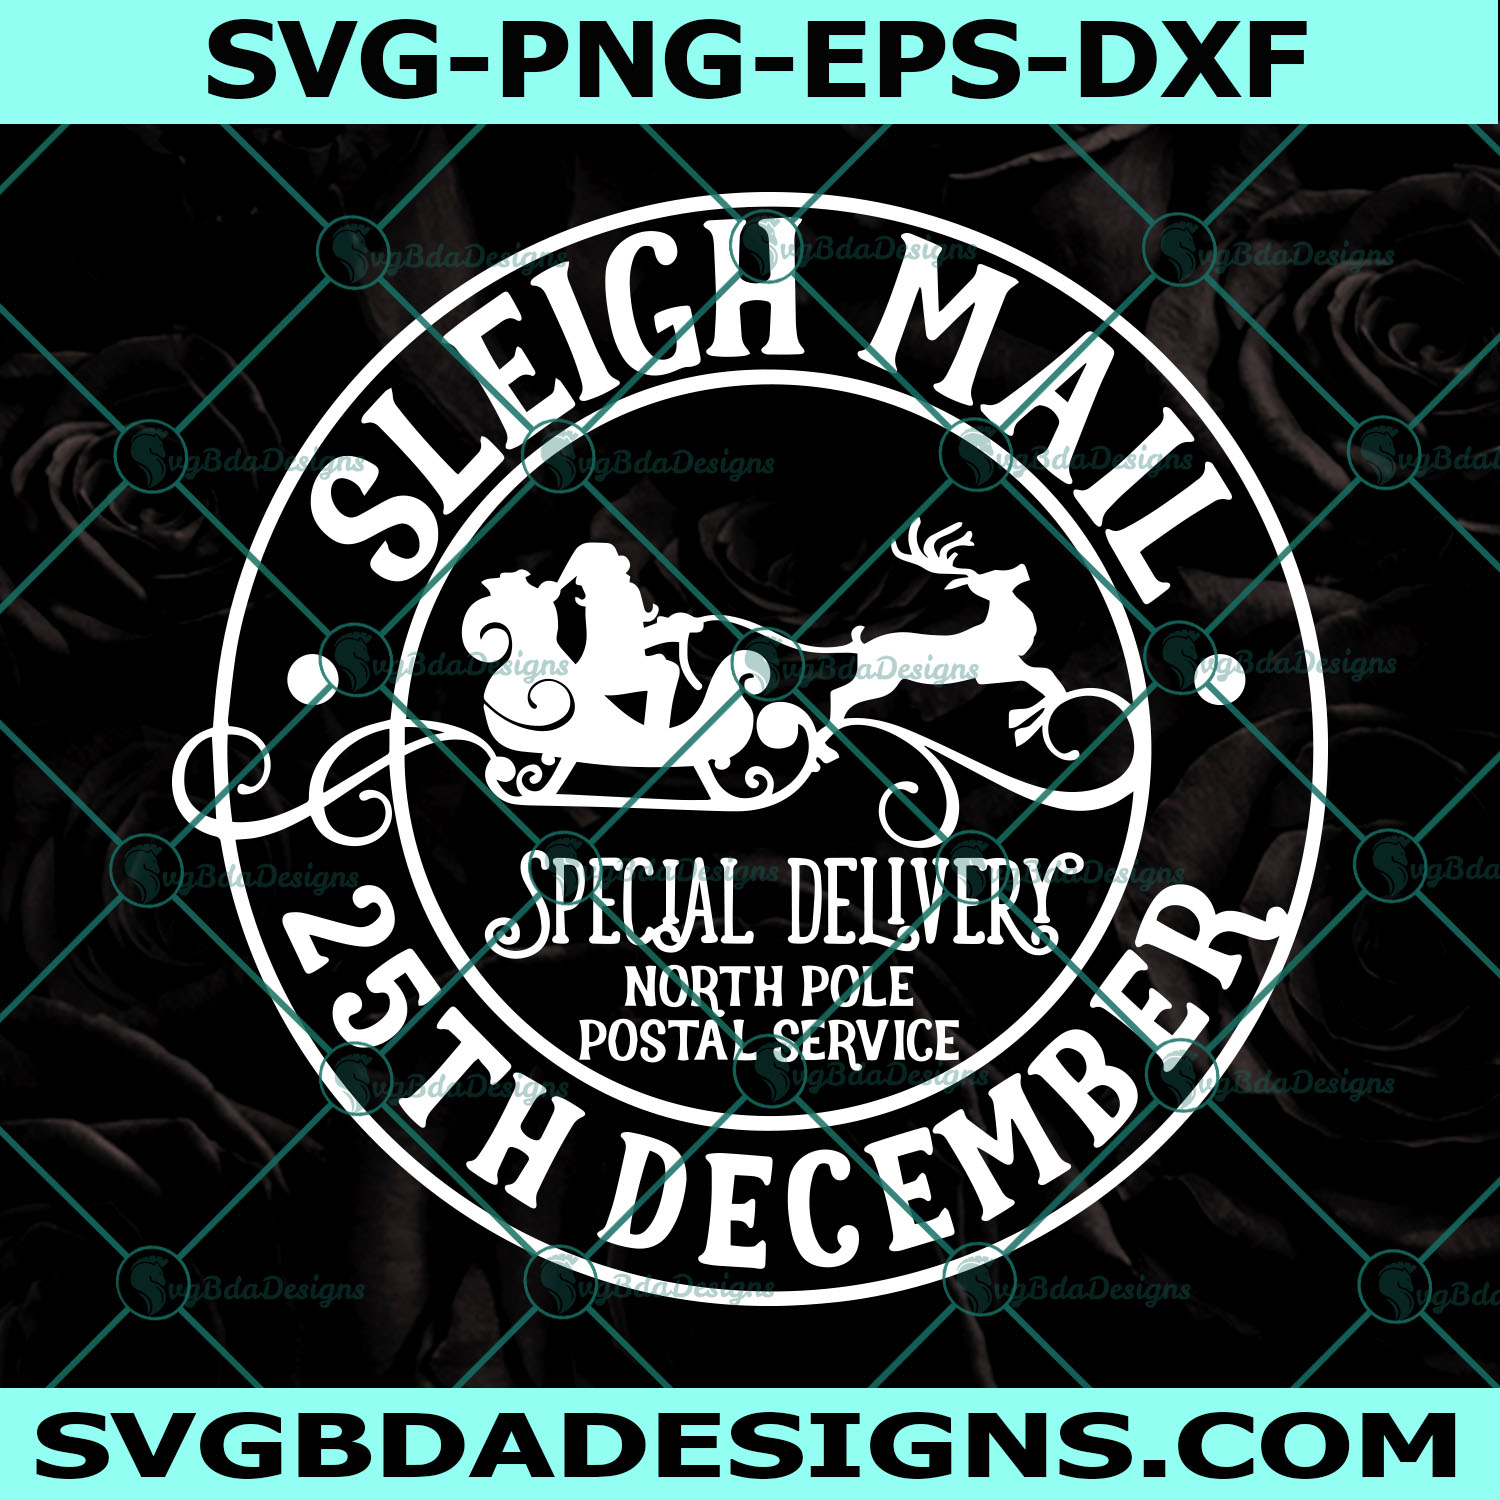 Sleigh Mail Svg, Special Delivery Svg, North Pole Express Svg, Christmas Song,Christmas Svg, Cricut, Digital Download